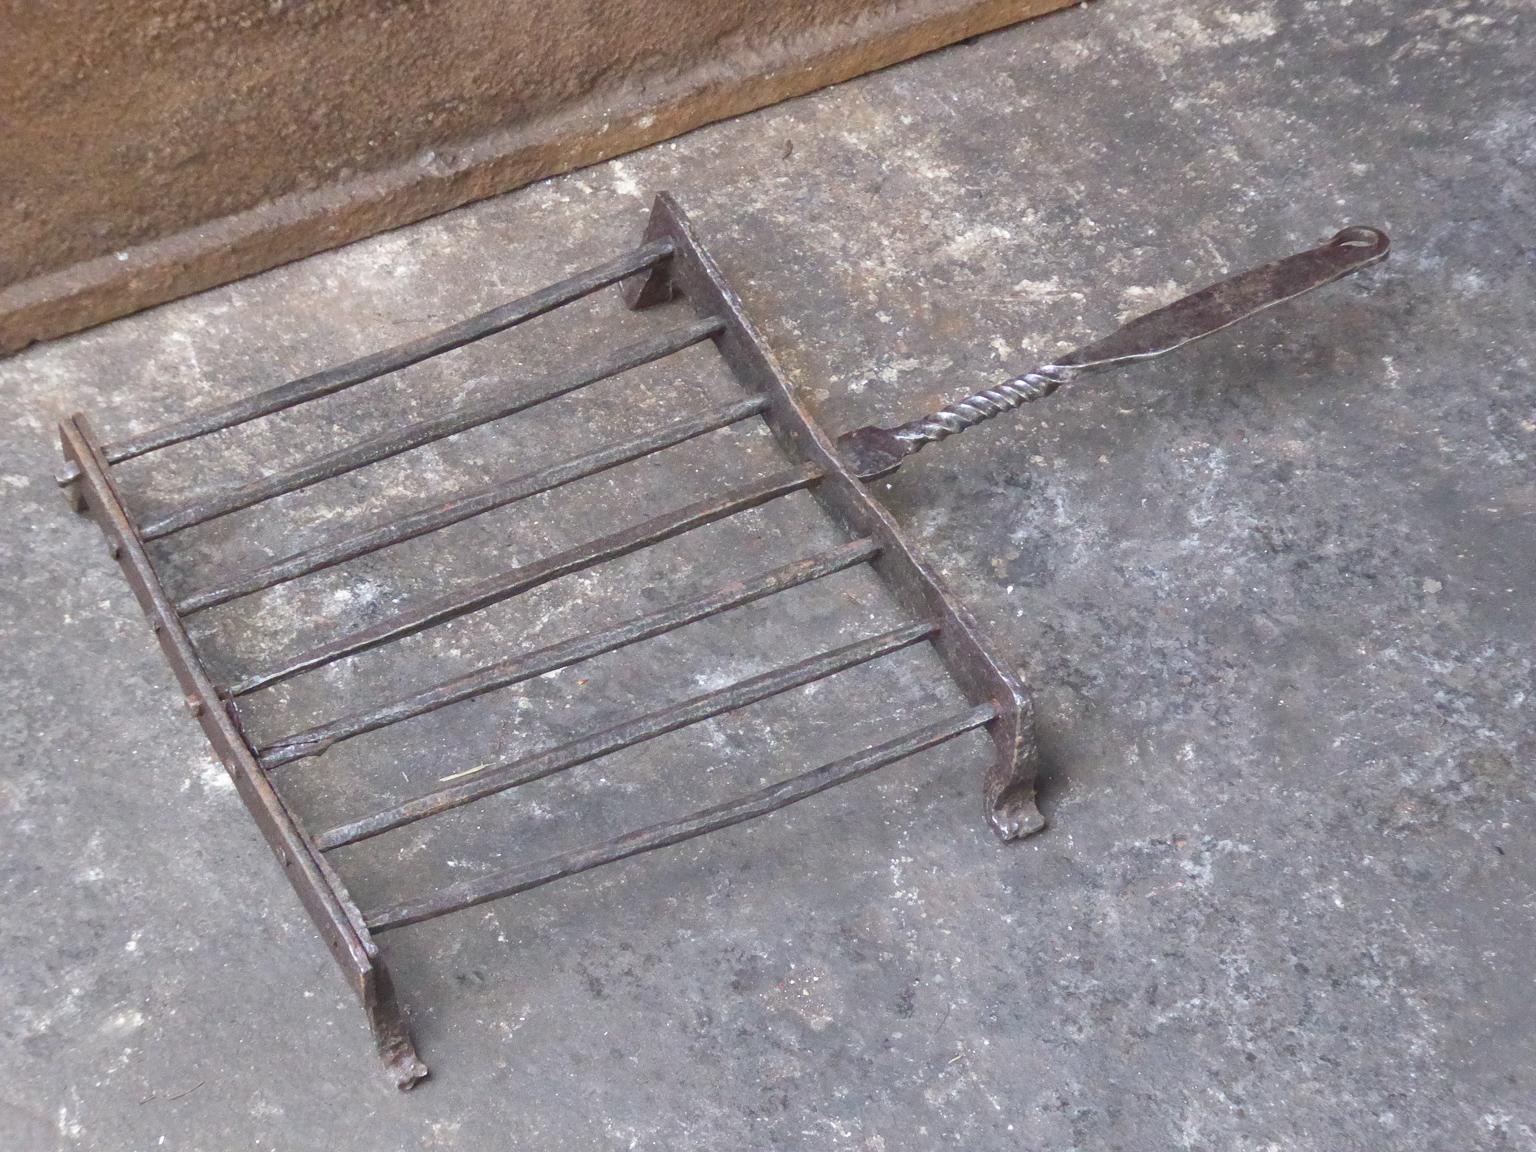 17th century French gridiron made of wrought iron. To prepare small pieces of meat quickly over the fire. Sometimes they were put in the fire or else on a trivet, depending on the size of the fire.







 